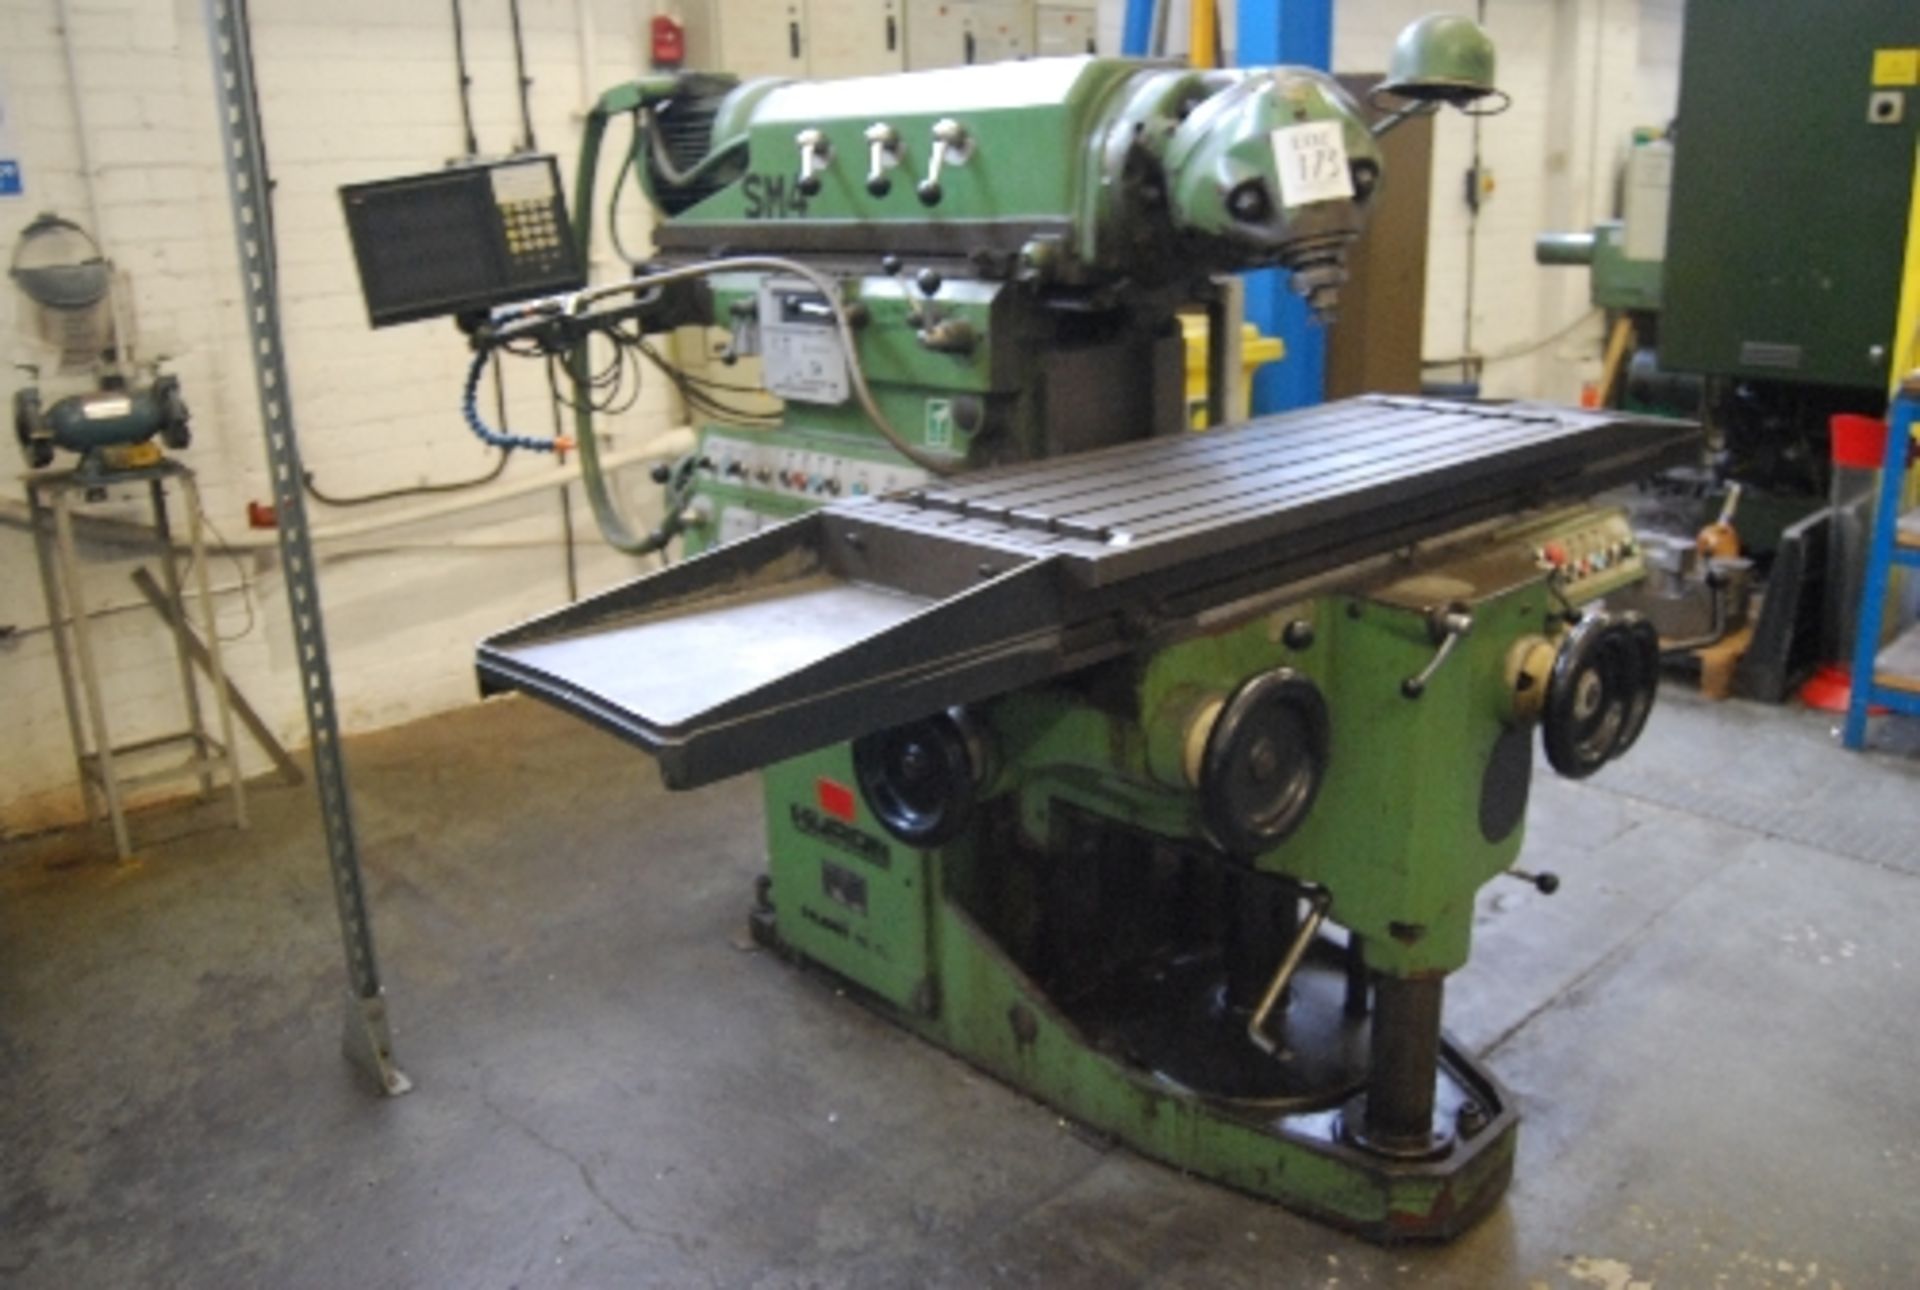 Huron NU3 universal milling machine, serial no. 15413 (year of manufacture 1978), table size